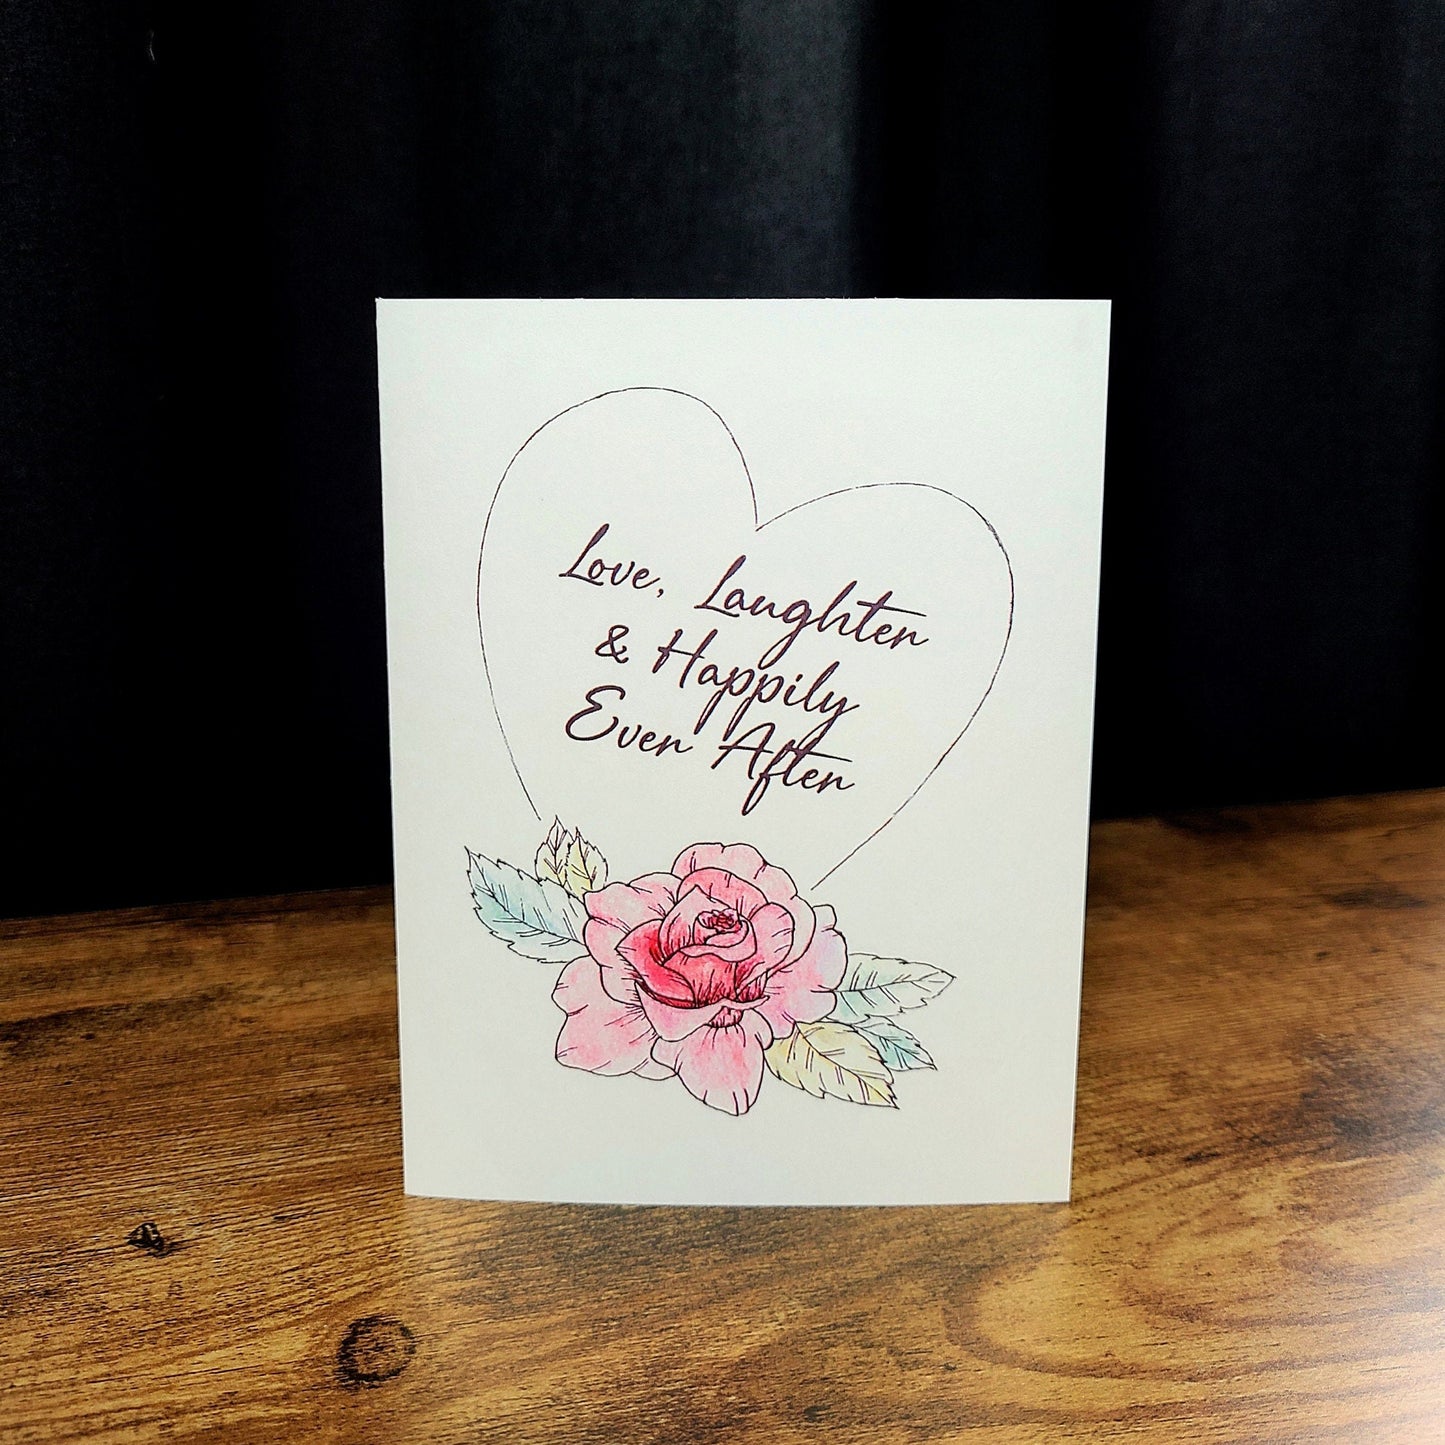 Wedding day card, Engagement card for couple, Love laughter and happily ever after, Love card, Cute couple card, Card for bride and groom